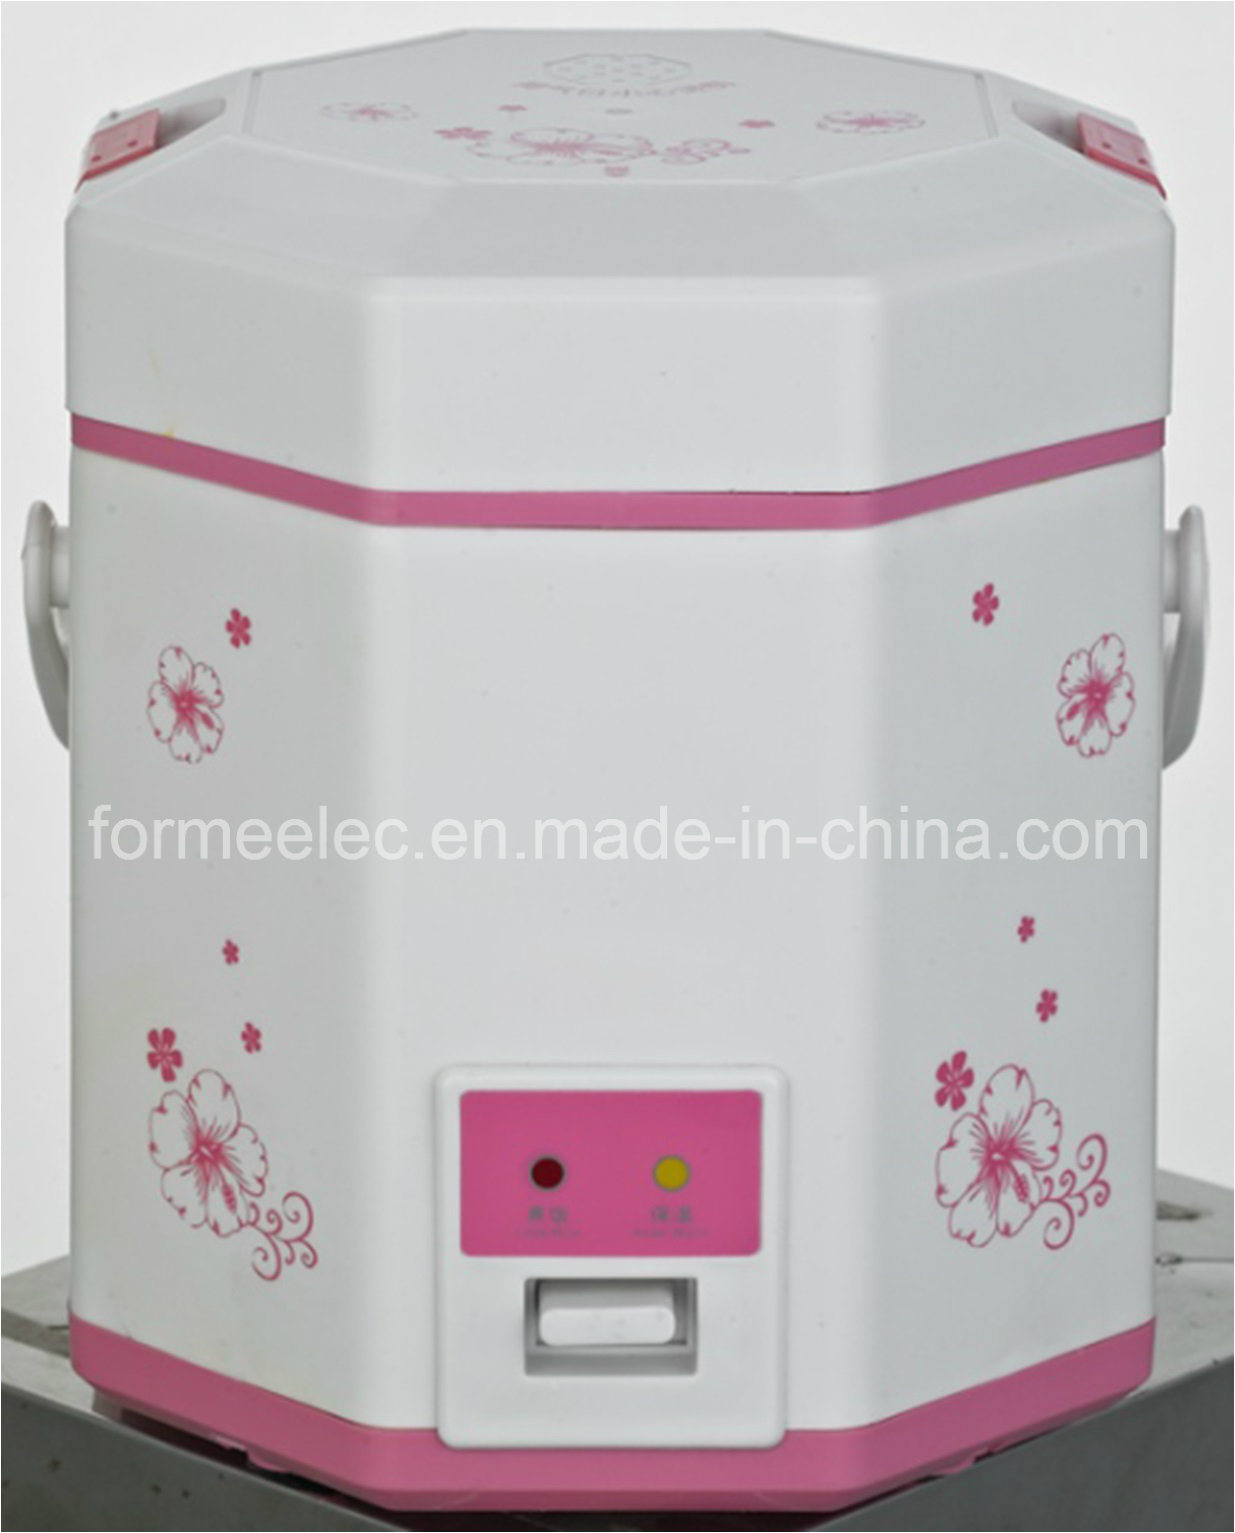 1.2L Portable Electrical Rice Cooker Mini Rice Cooker